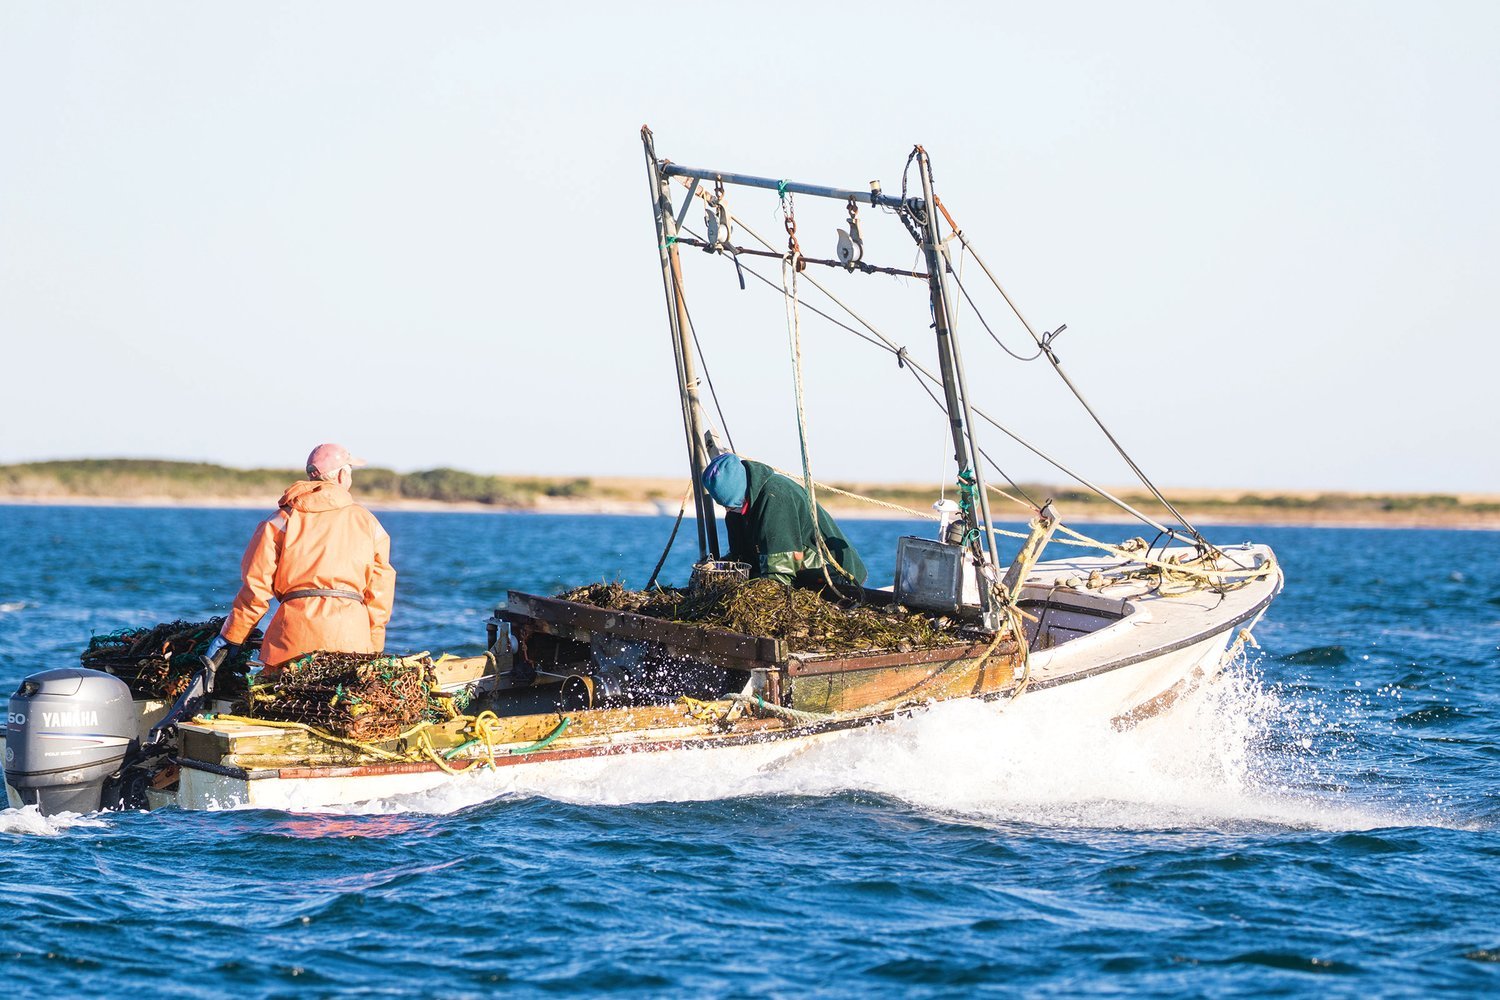 Nantucket's bay scallop harvest last year was just 3,200 bushels, one of the lowest since records have been kept.